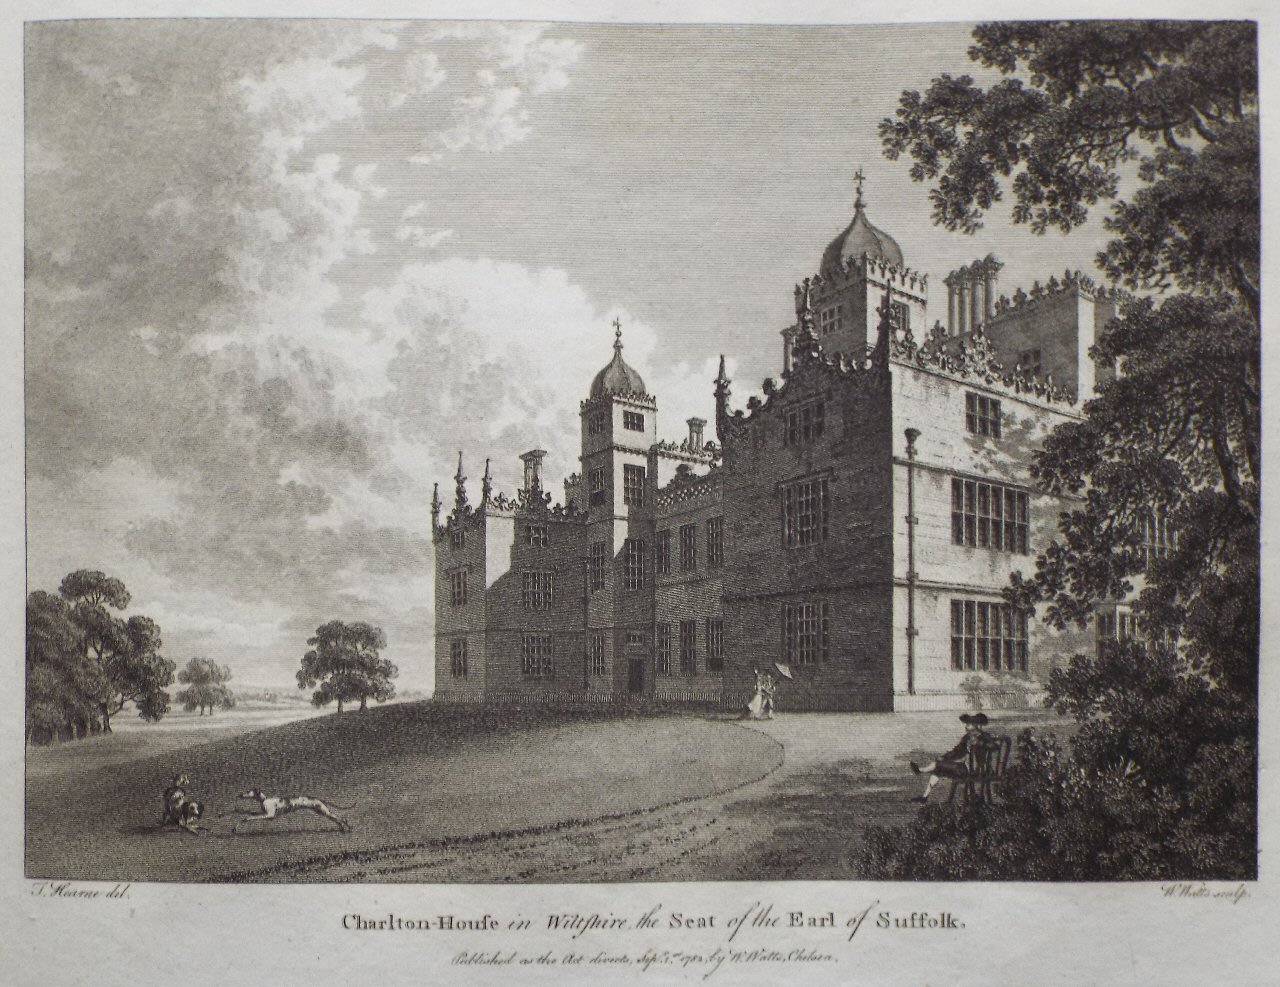 Print - Charlton-House in Wiltshire, the Seat of the Earl of Suffolk. - Watts